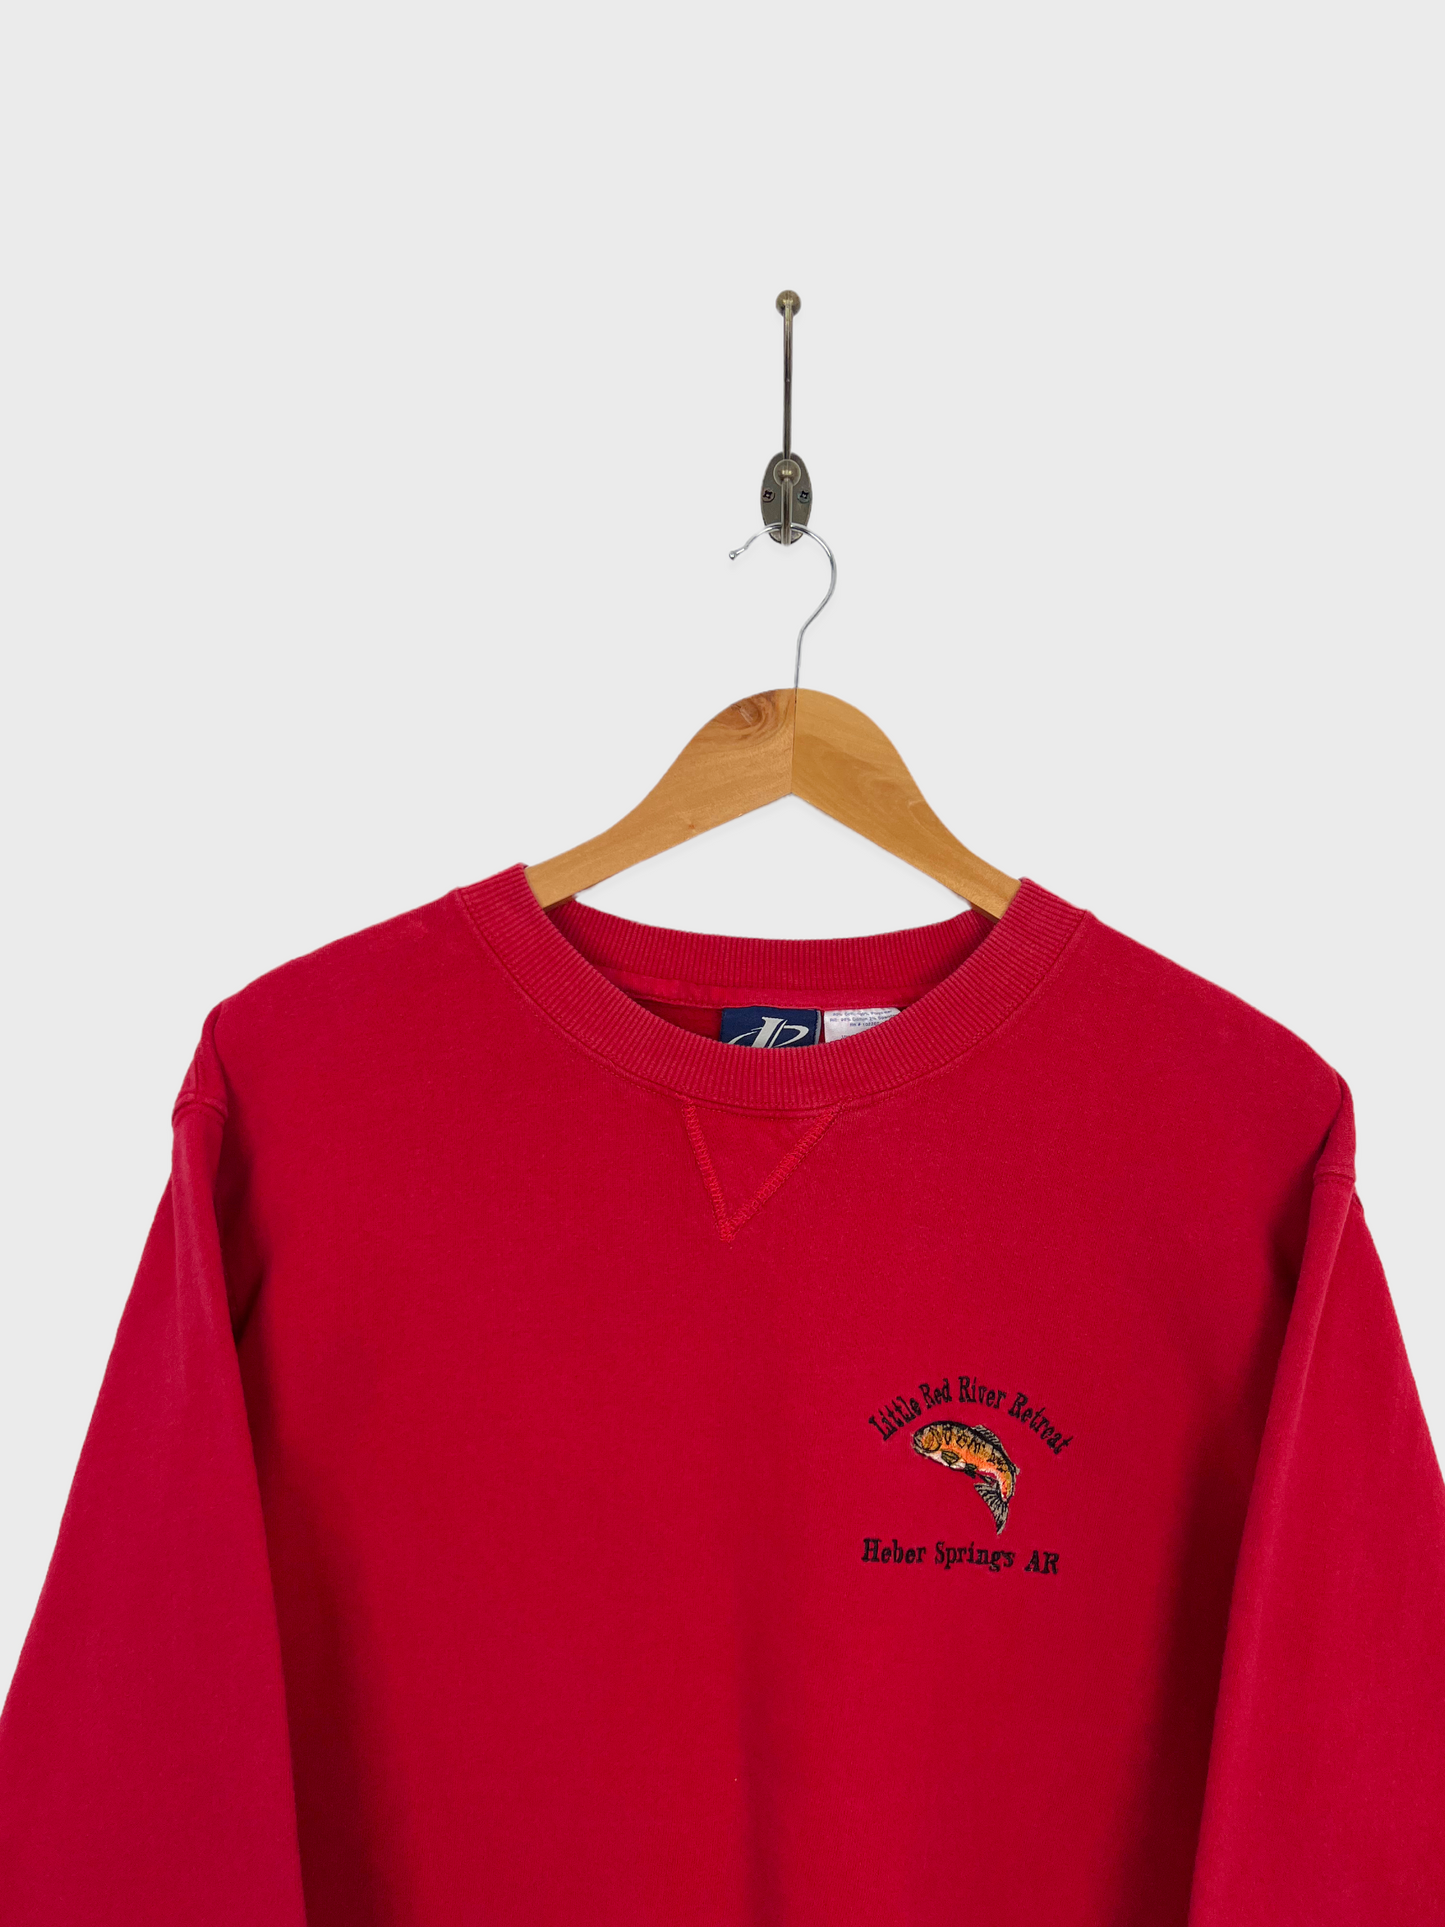 90's Little Red River Retreat Embroidered Vintage Sweatshirt Size 10